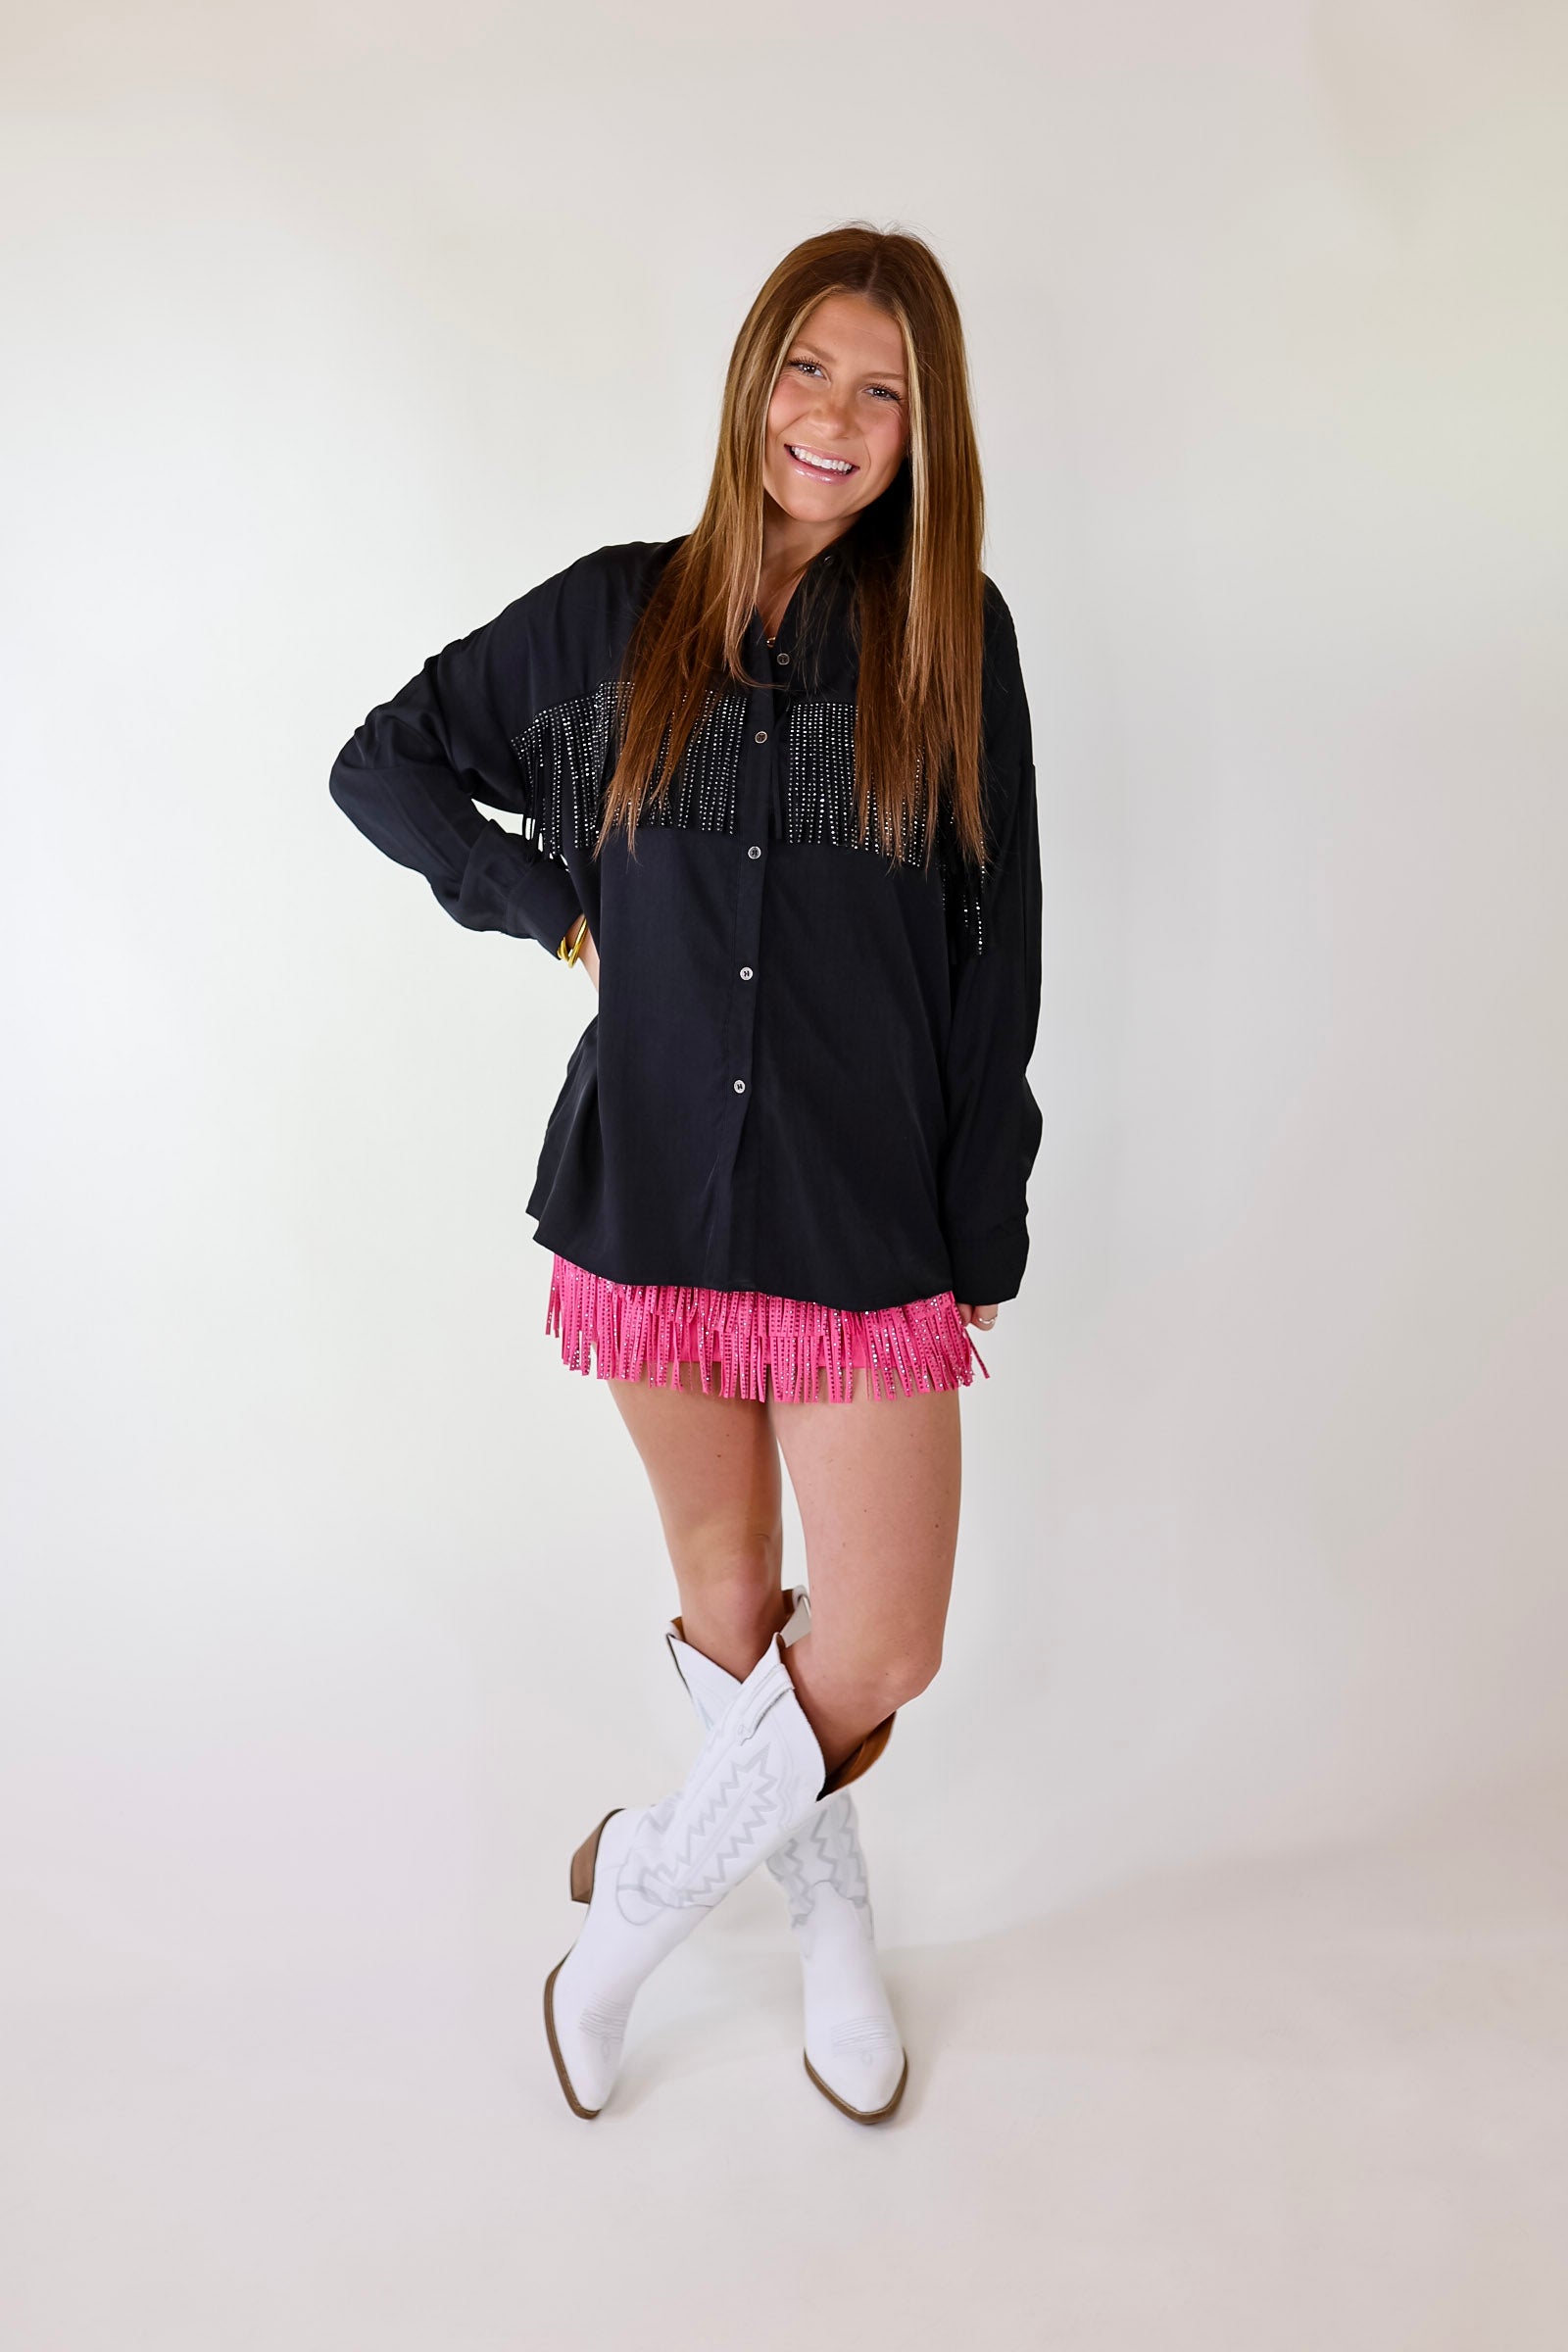 All That Shimmers Crystal Fringe Button Up Top with Long Sleeves in Black - Giddy Up Glamour Boutique